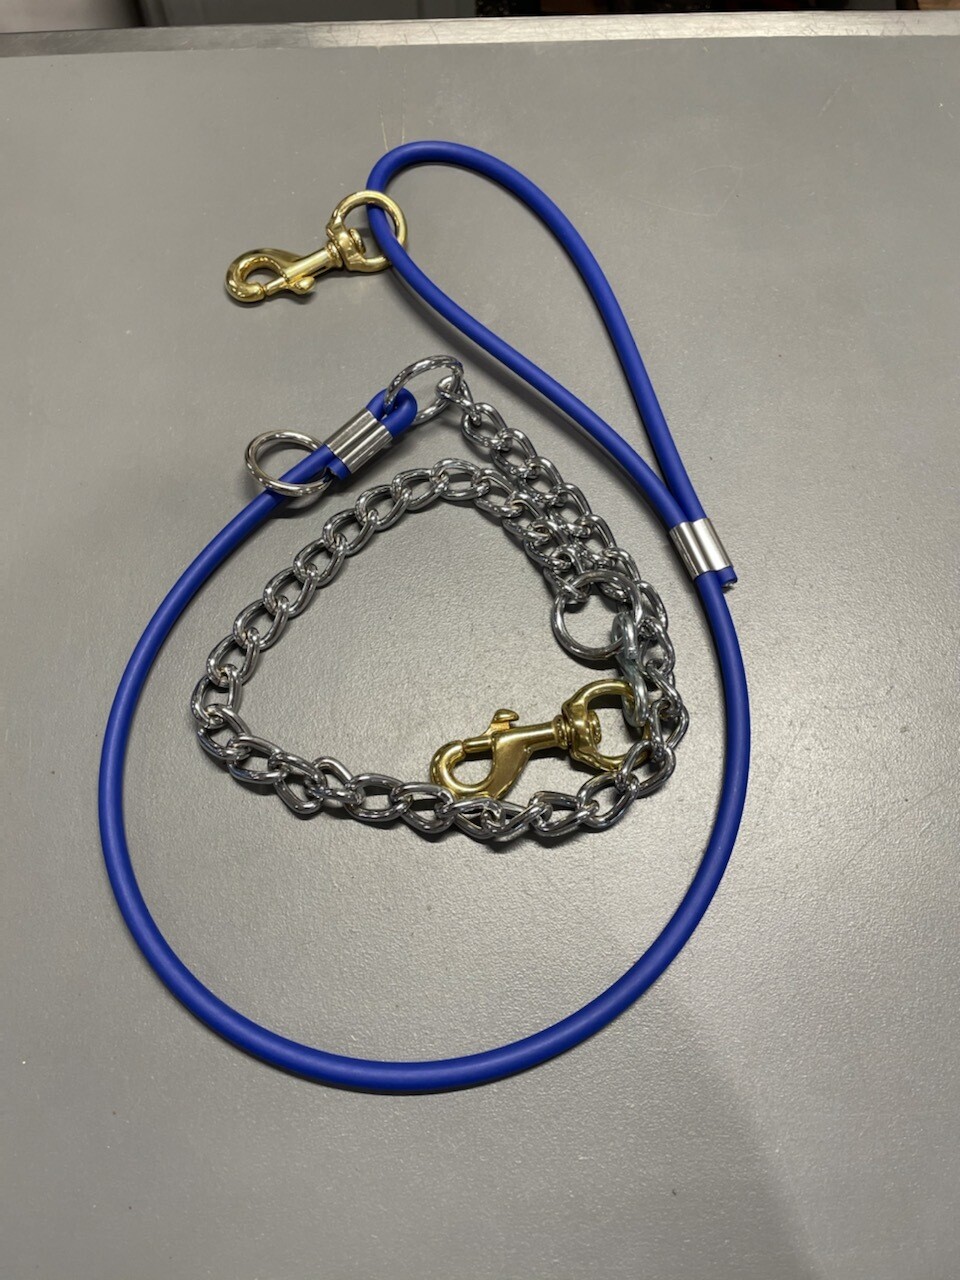 rope and chain lead